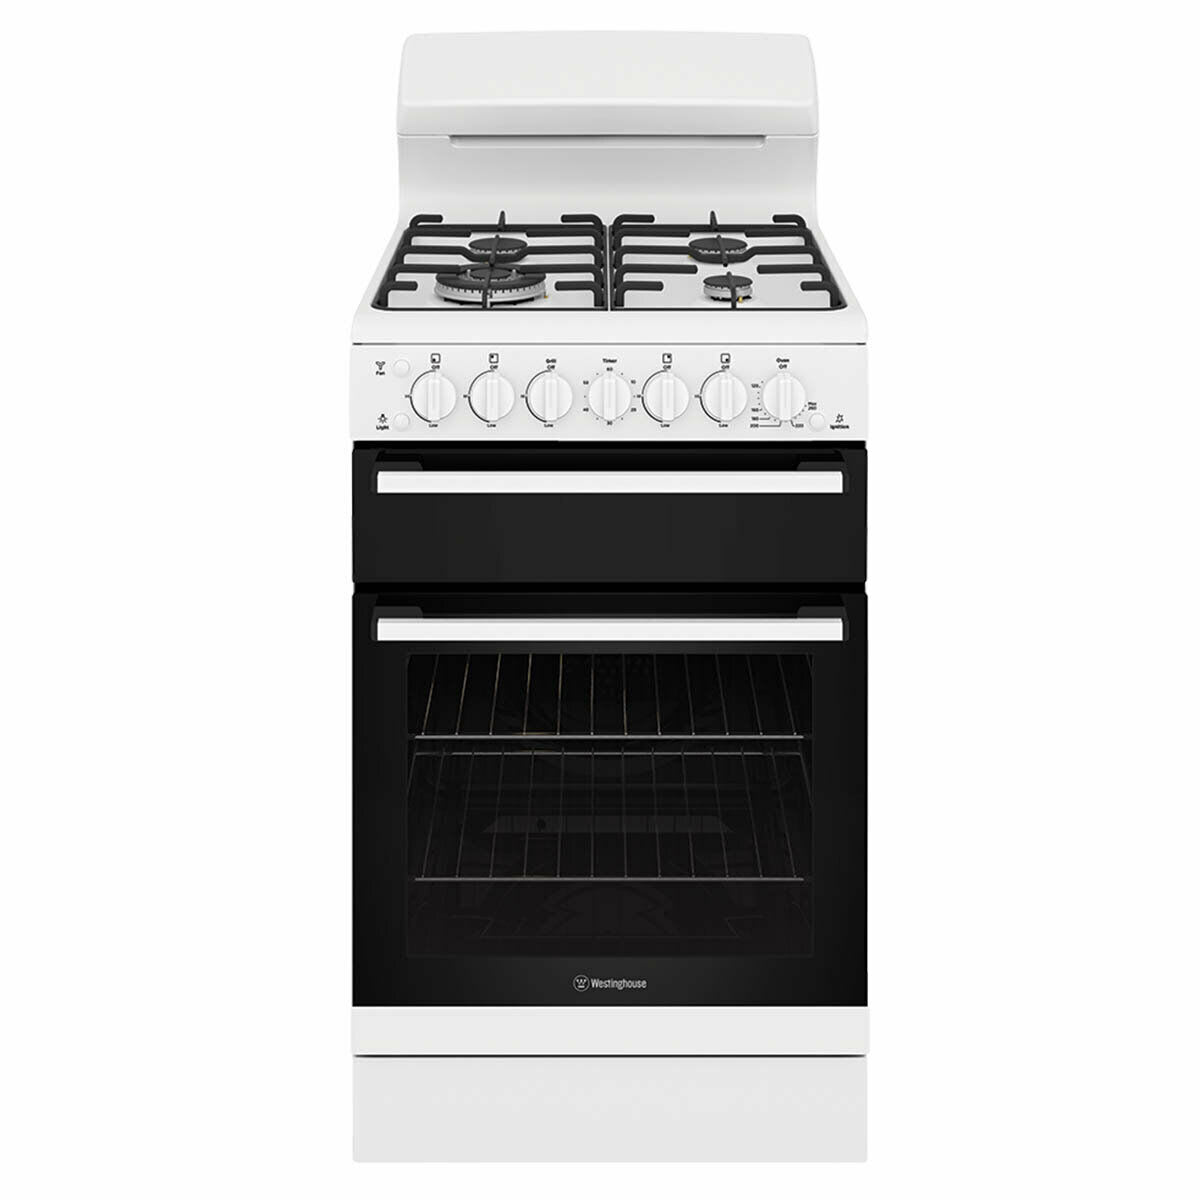 Westinghouse WLG512WCNG Freestanding Natural Gas Oven/Stove_1